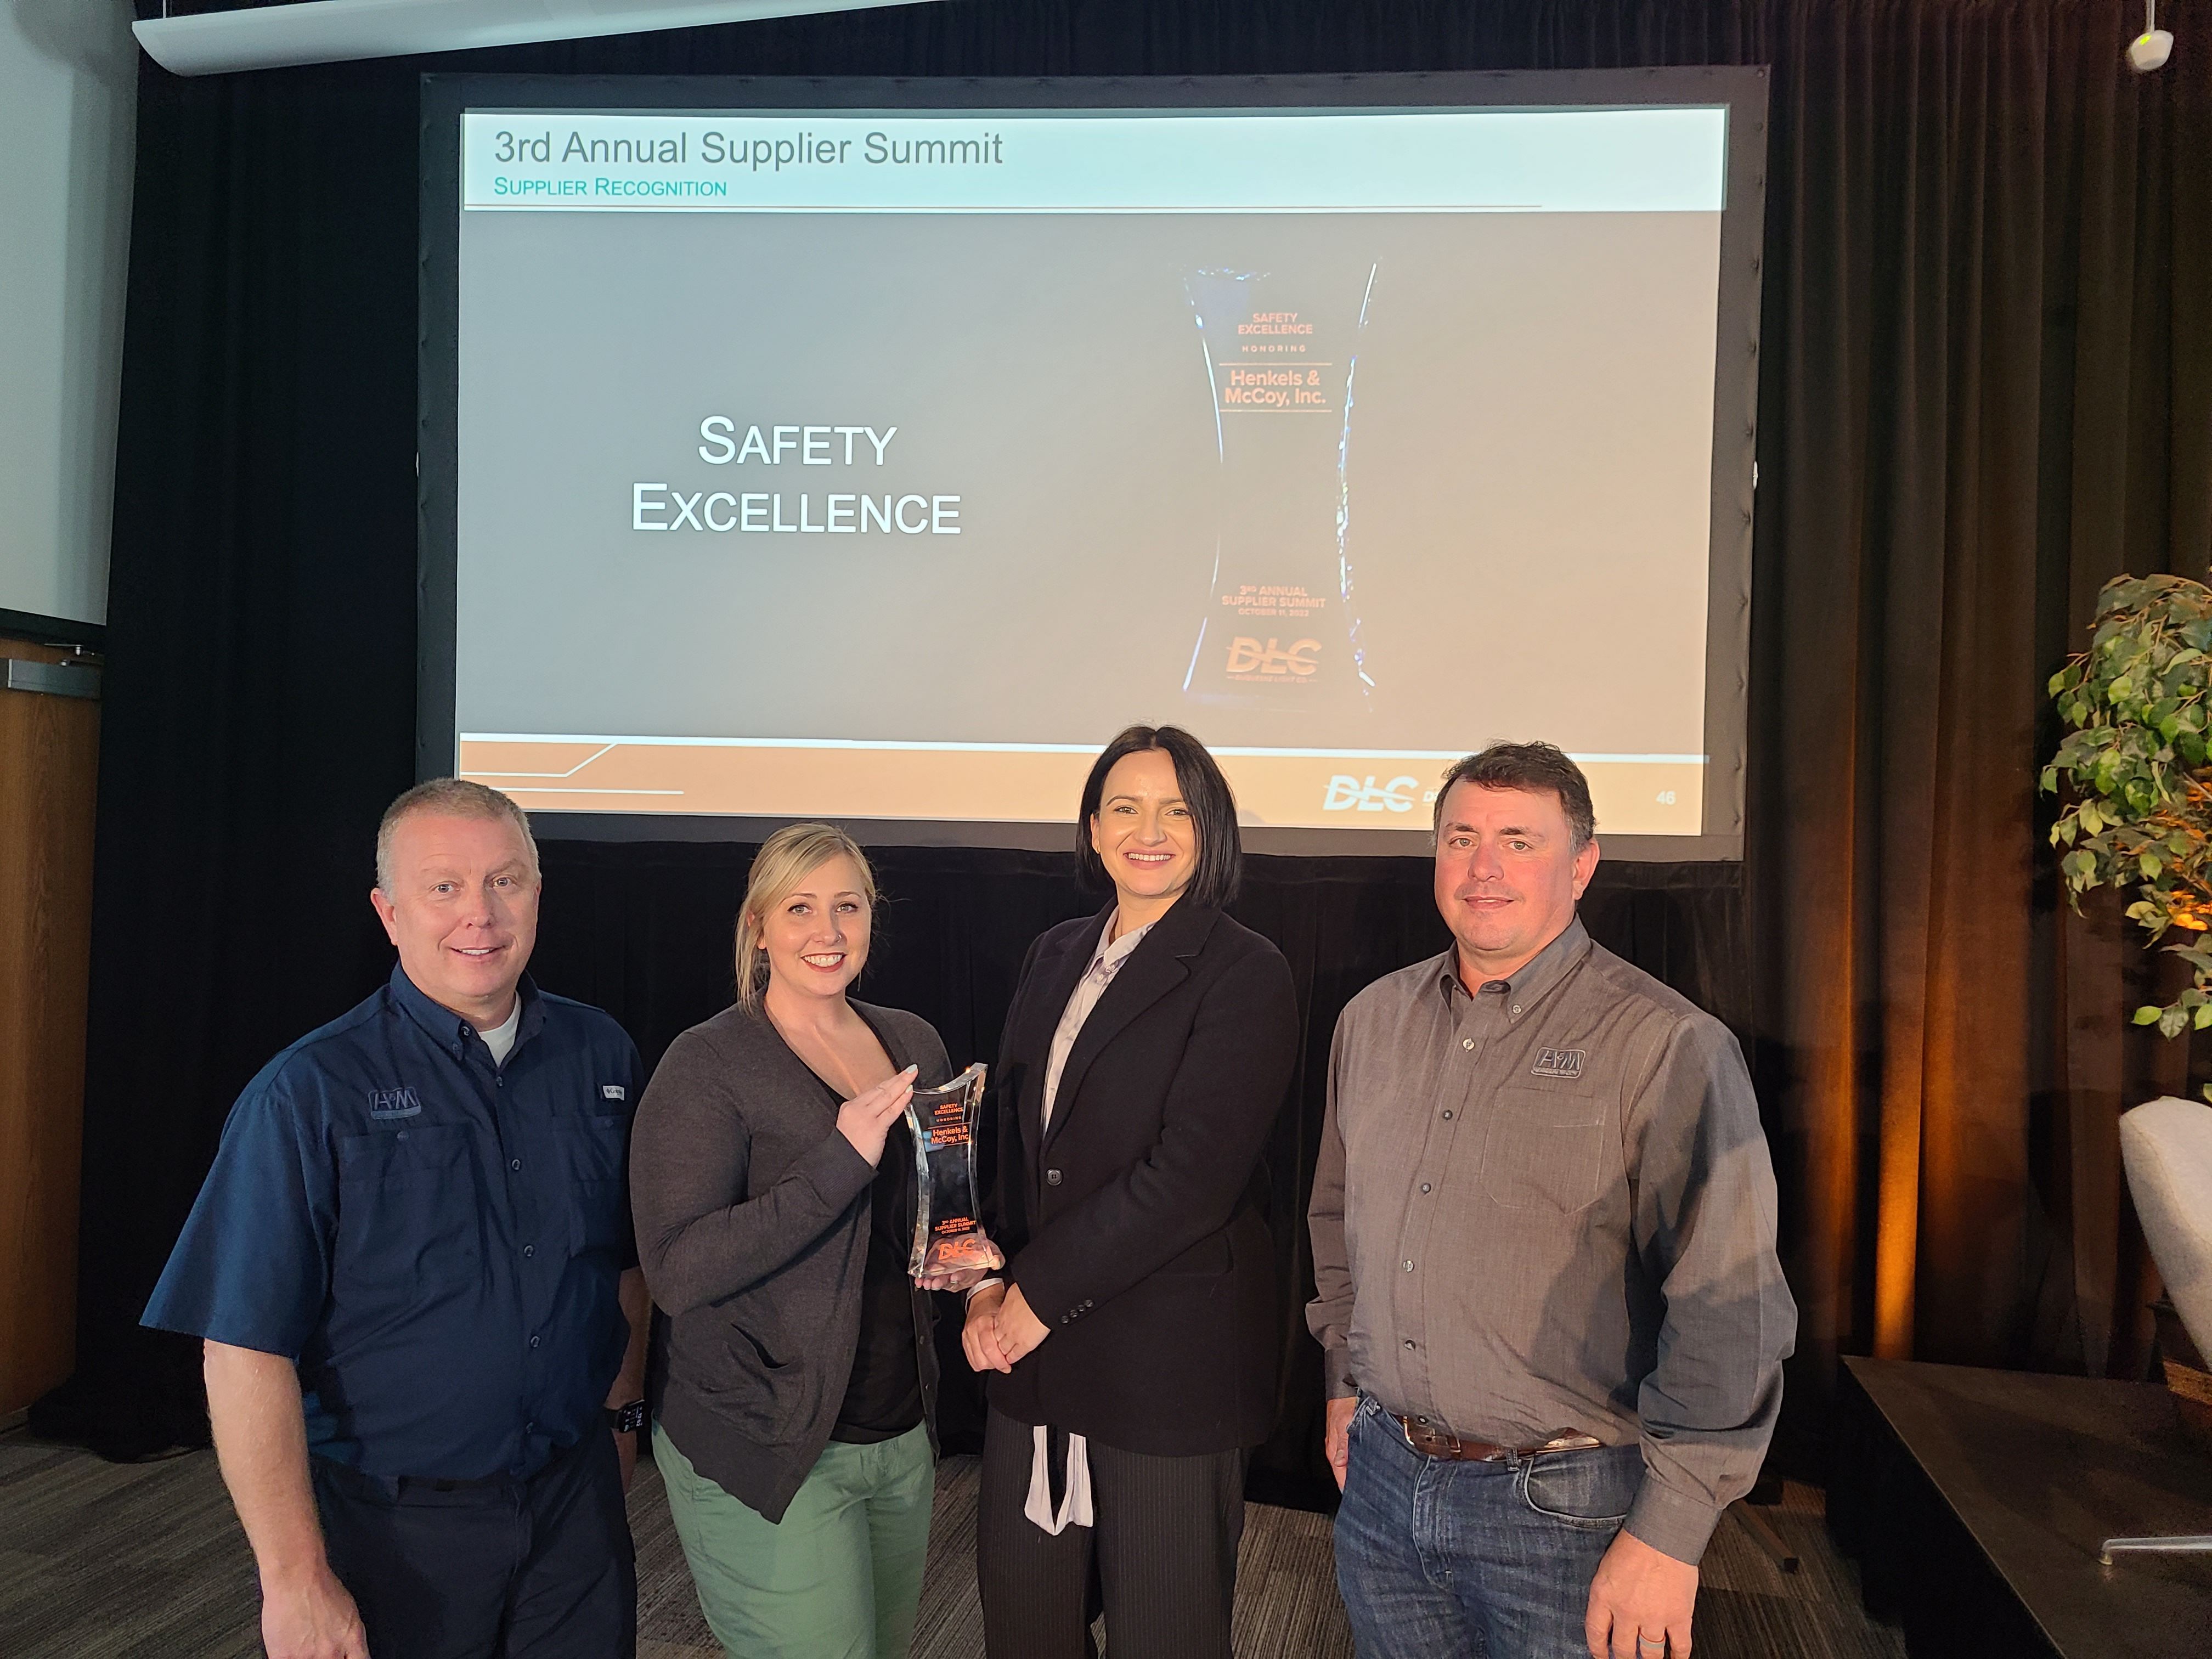 DLC Procurement Manager Aida Filipovic (second from right) pictured with representatives from Henkels & McCoy, which received recognition for Safety Excellence.